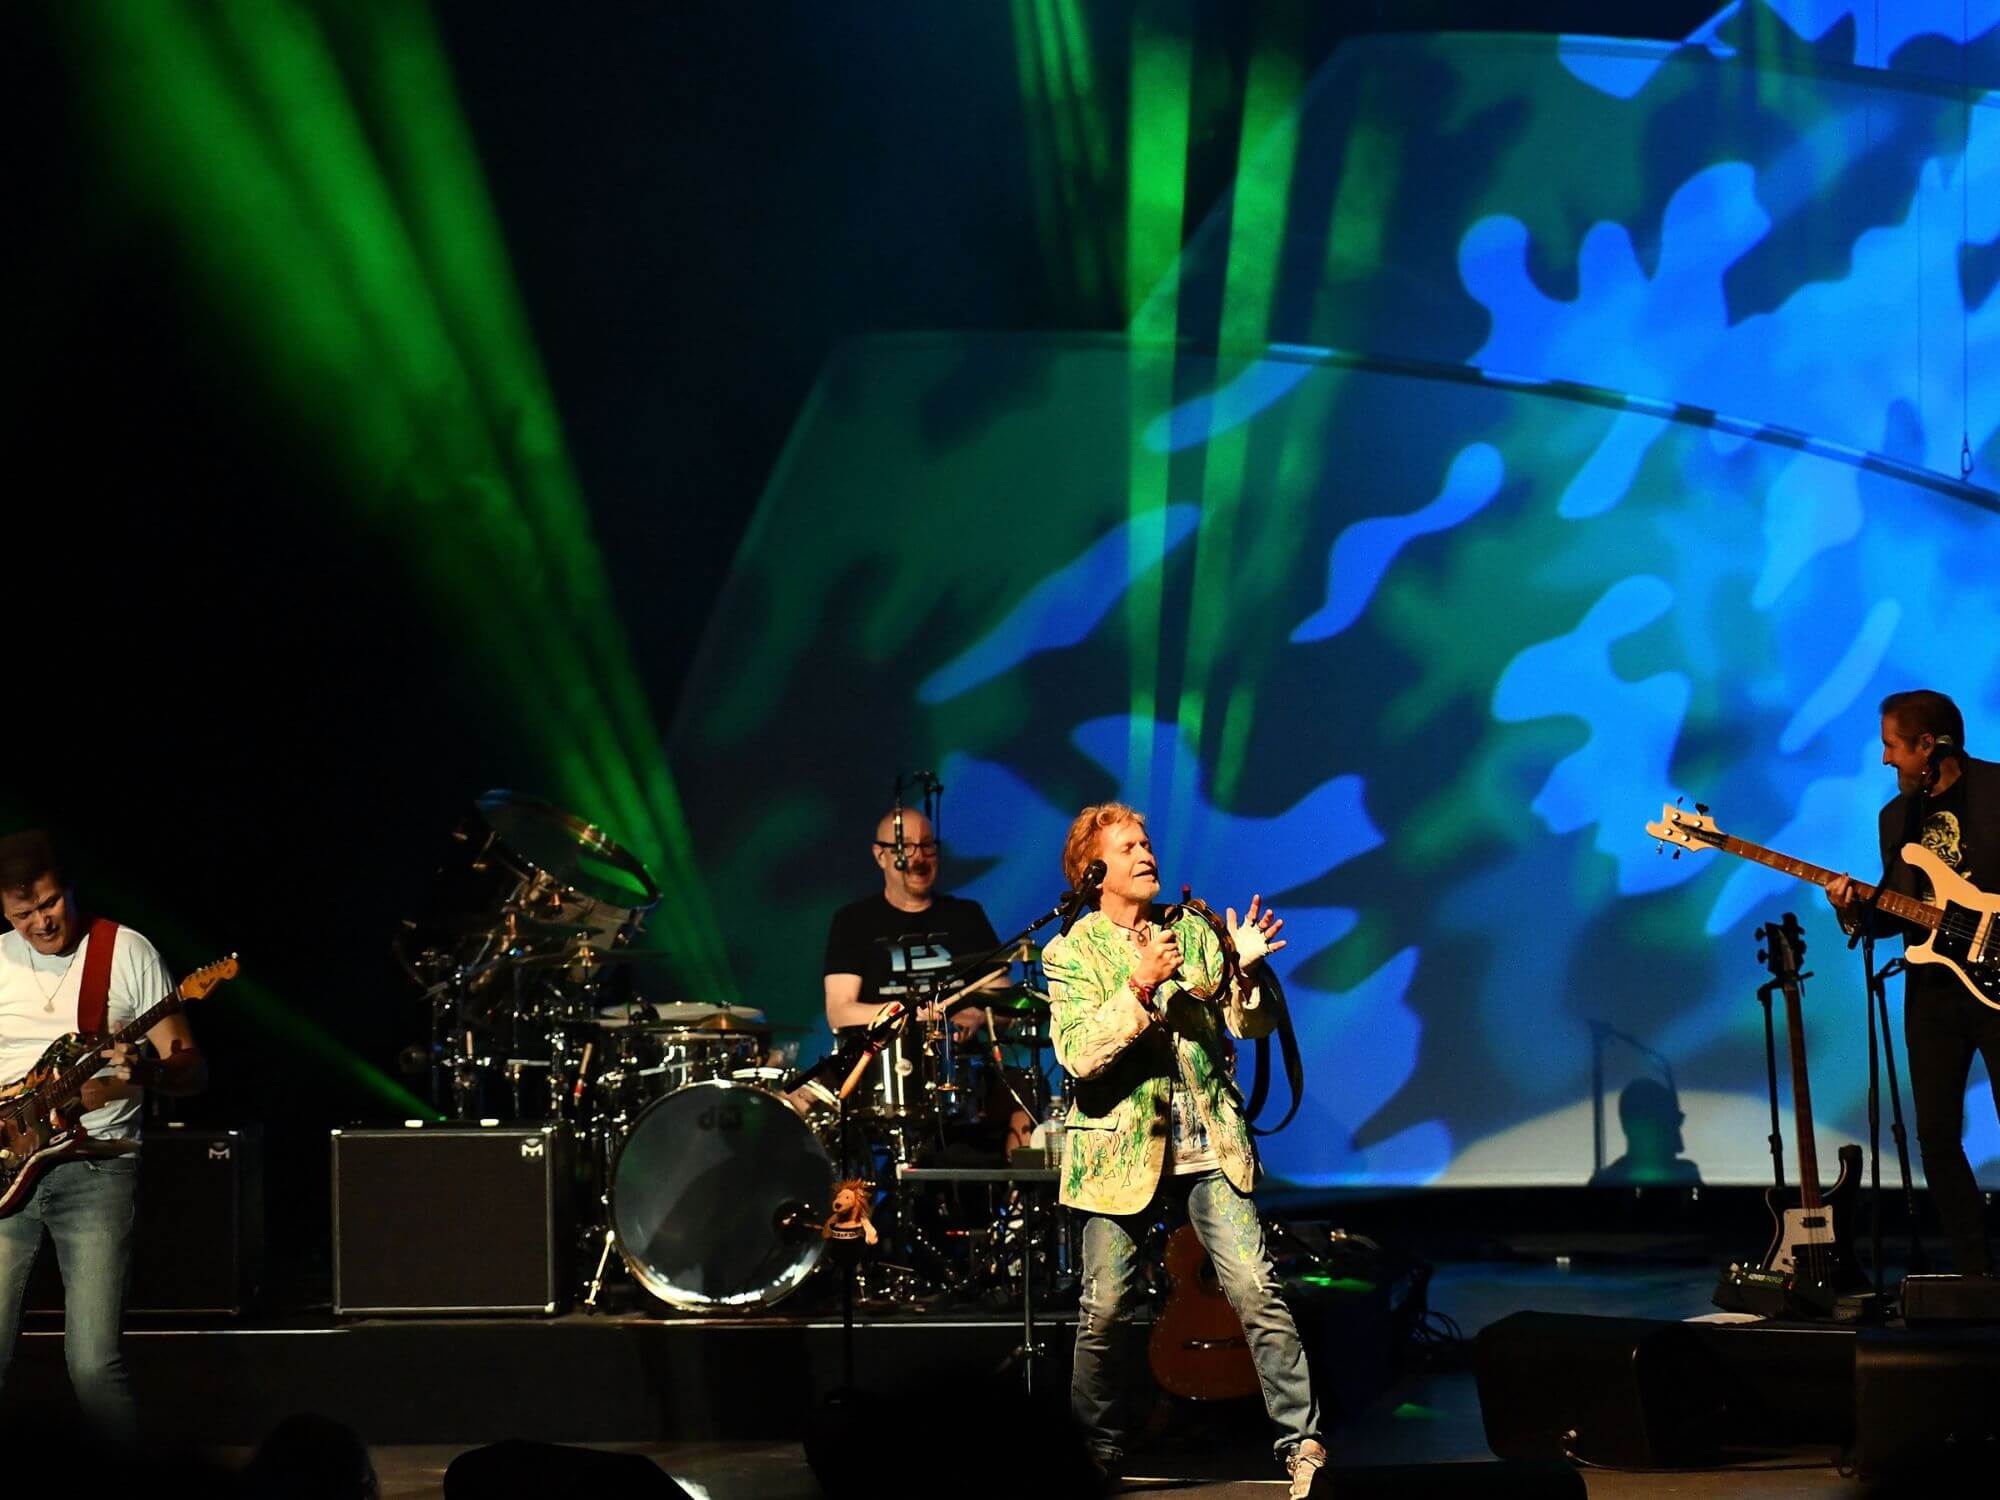 Progressive rock band Yes performing onstage